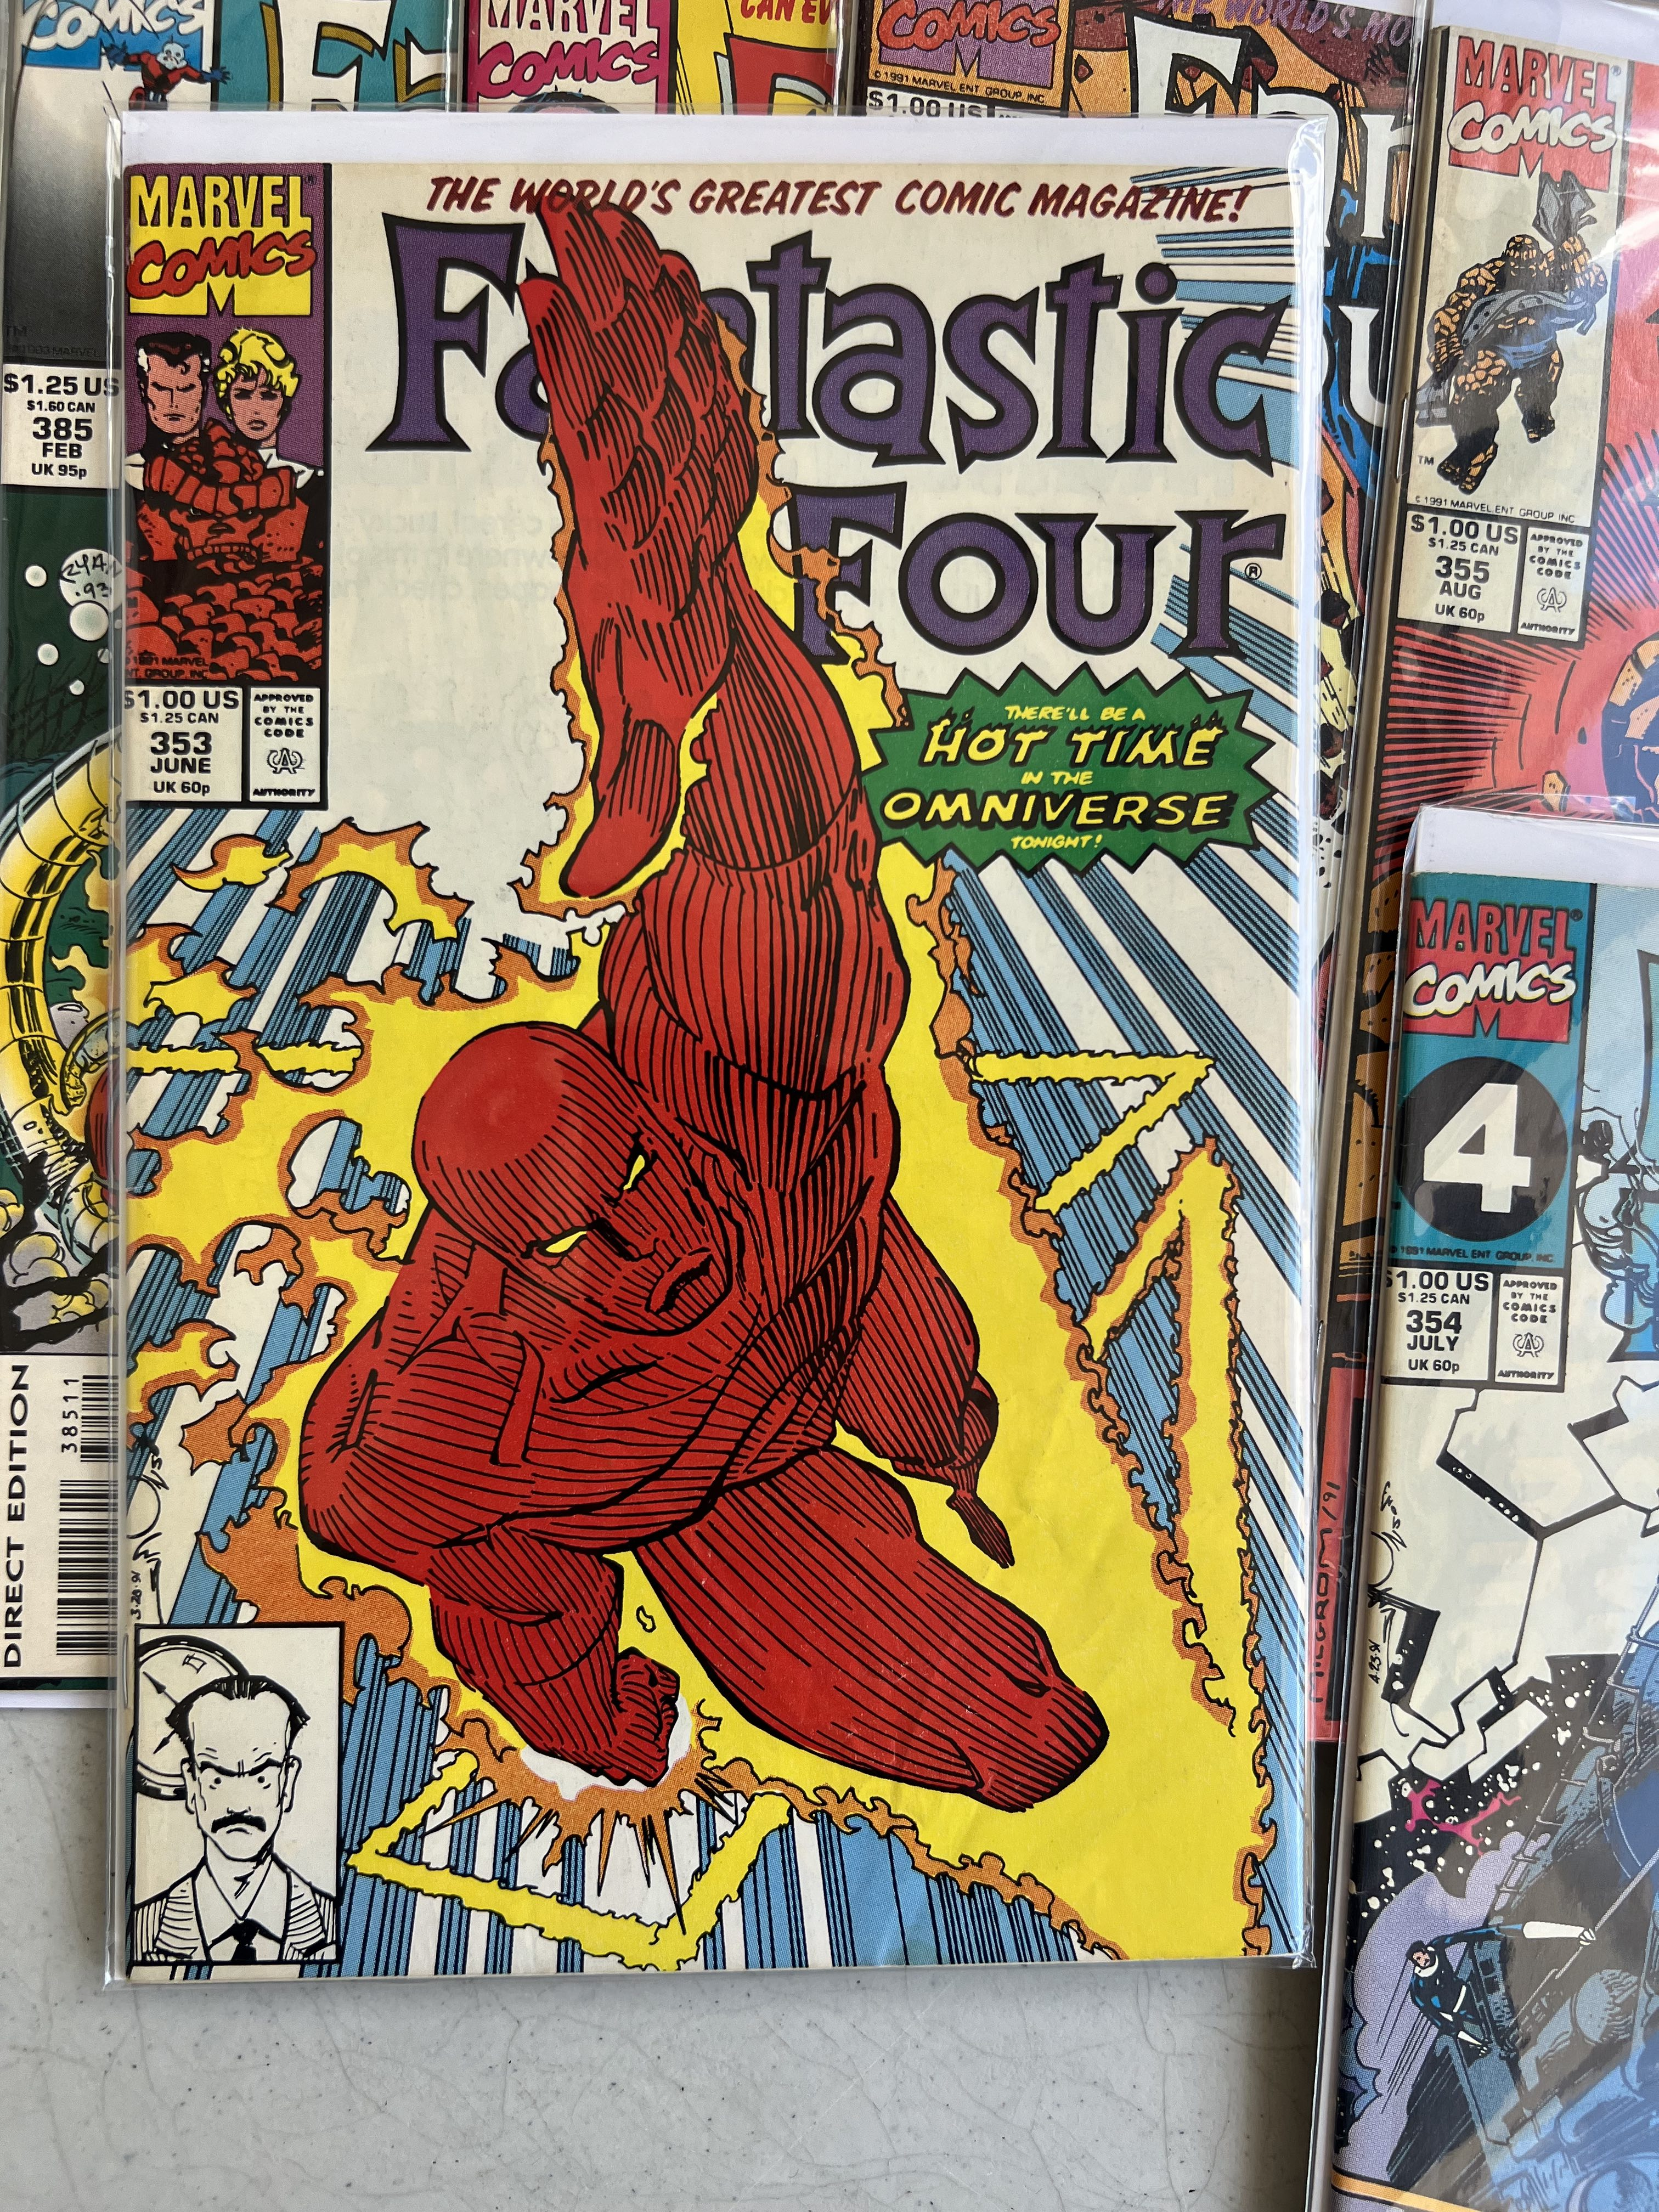 Comic Book Fantastic Four collection lot 11 first app